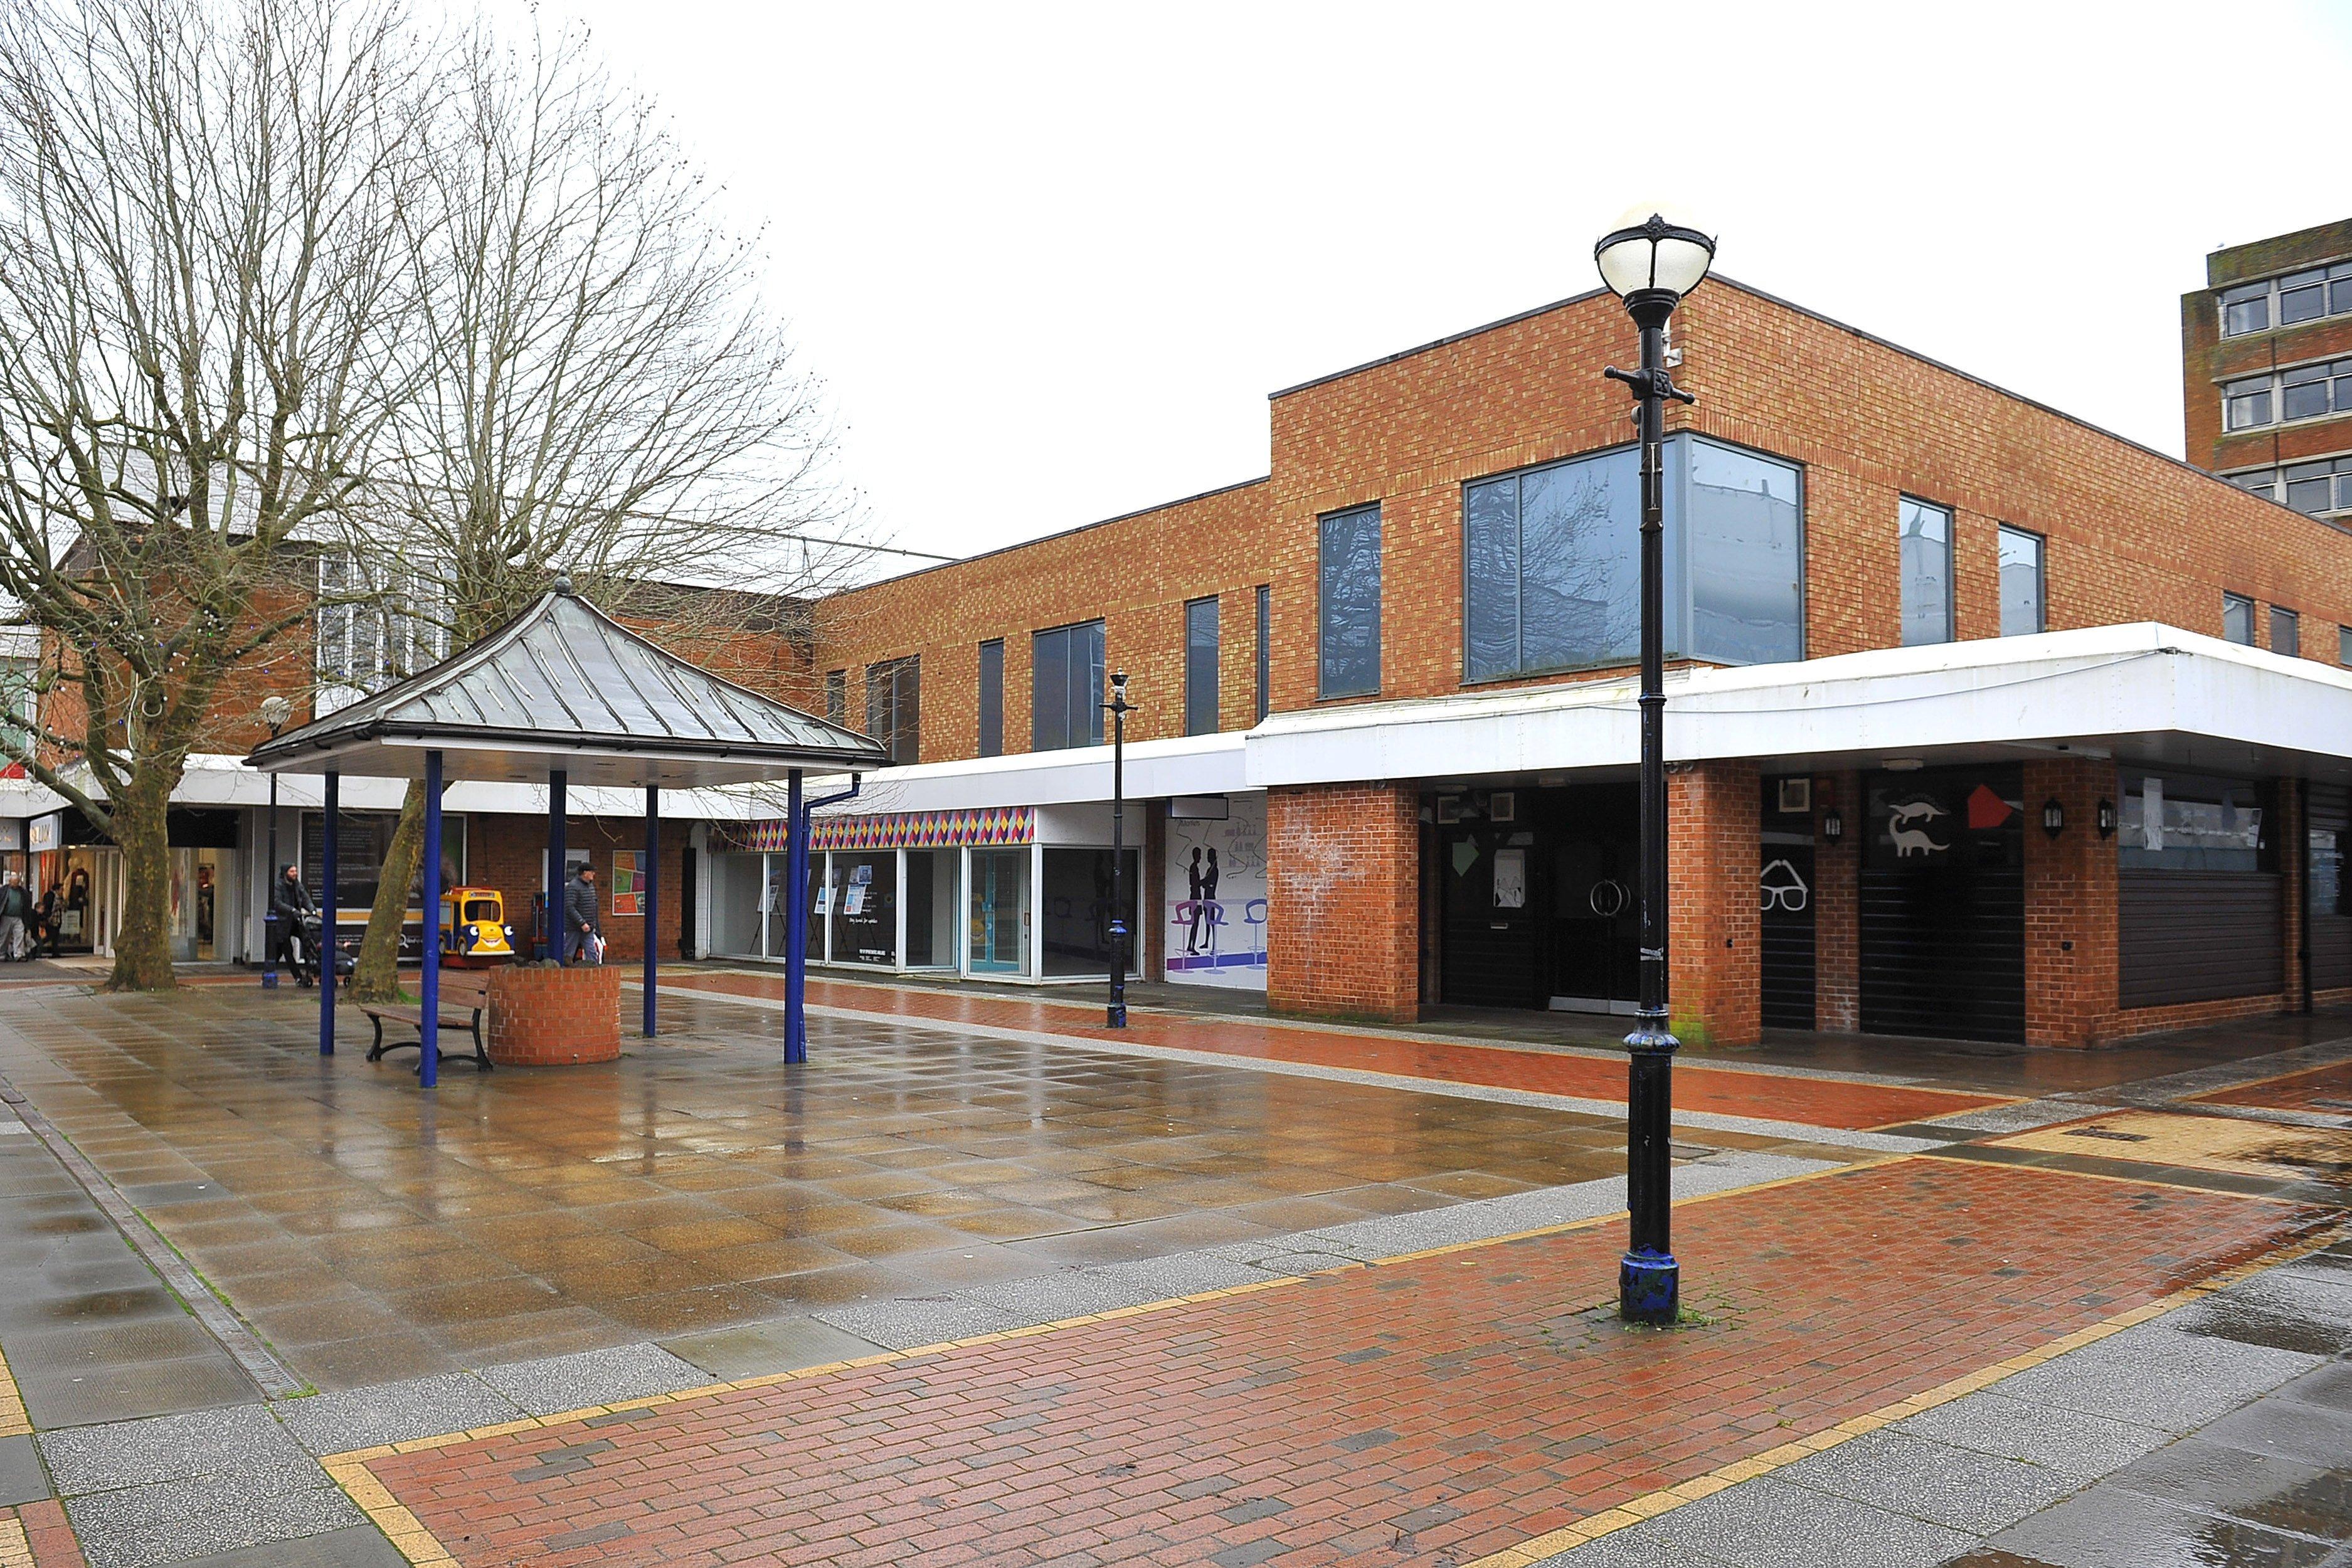 Burgess Hill shopping centre areas which are due for regeneration in 2020. Pic Steve Robards SR20010201 SUS-200201-135010001